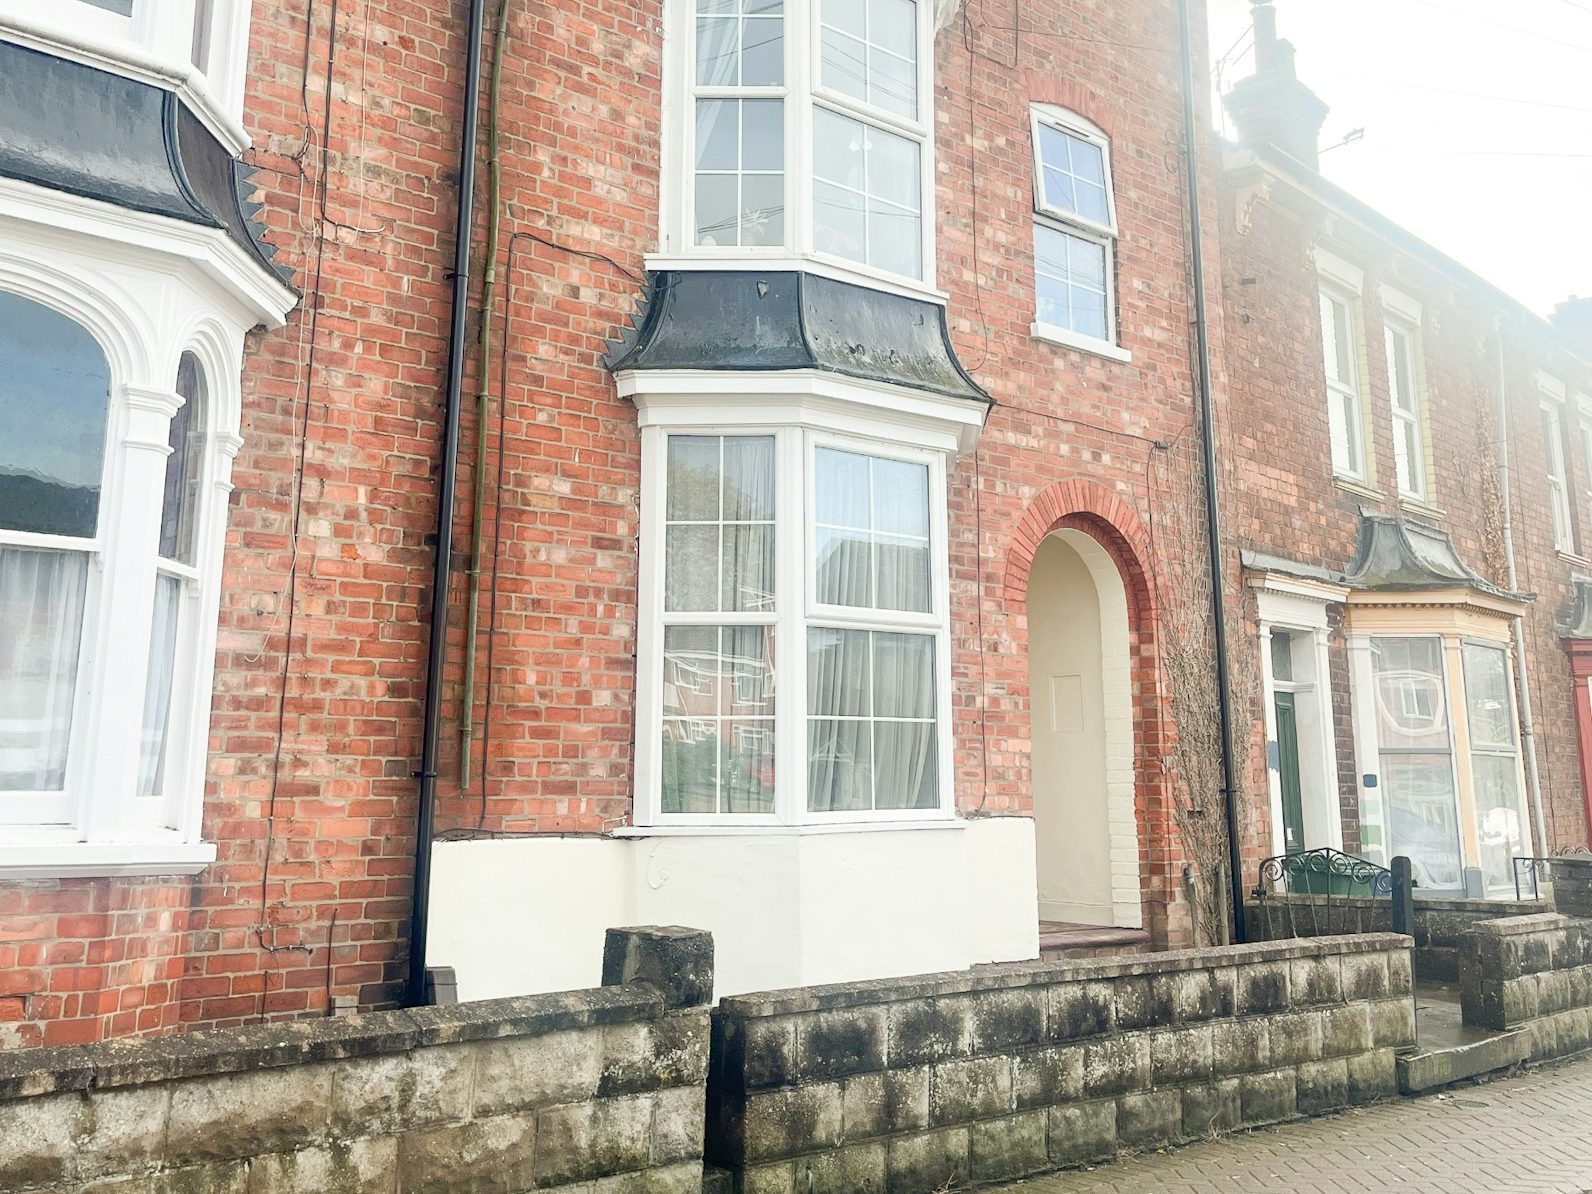 Flat to rent on Altham Terrace Lincoln, LN5